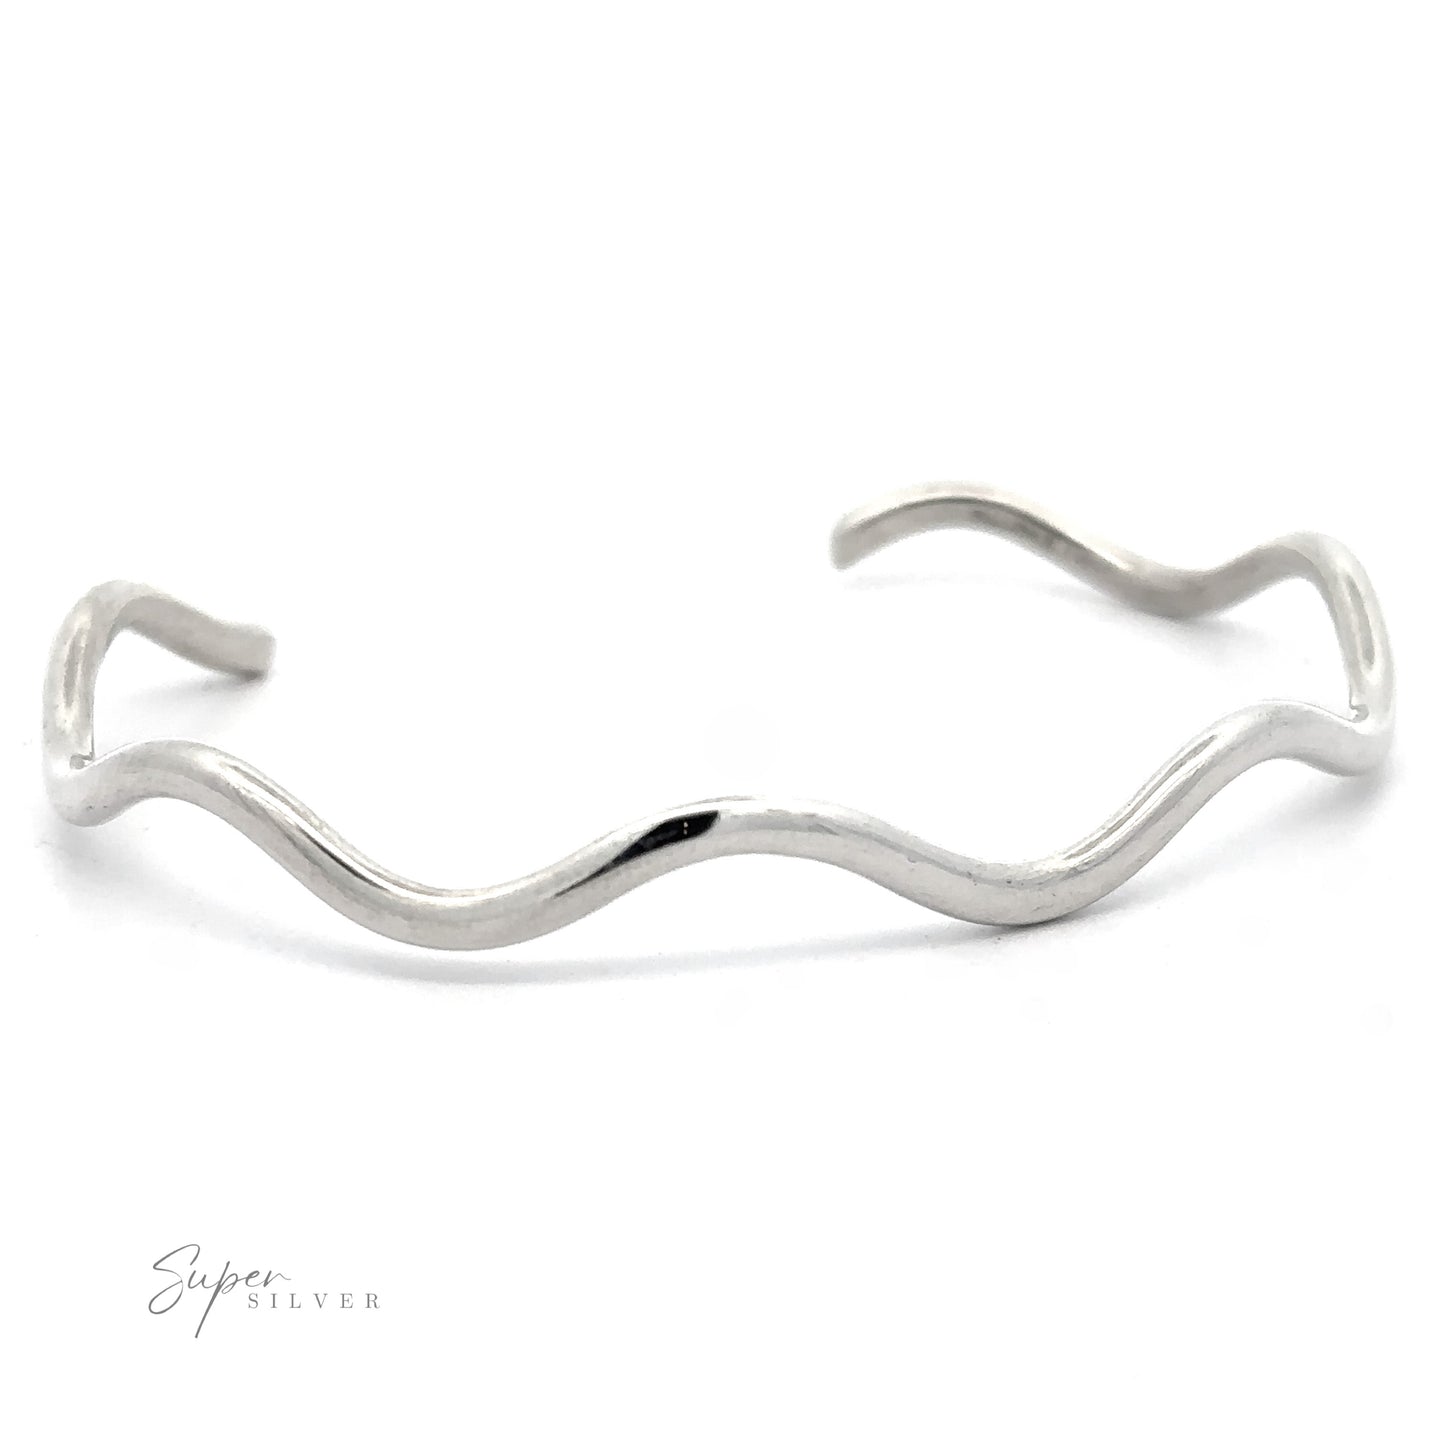 
                  
                    A silver, wavy-design bangle bracelet on a white background. The "Native American Handmade Silver Wavy Cuff" logo is visible in the bottom left corner, highlighting its sterling silver craftsmanship.
                  
                